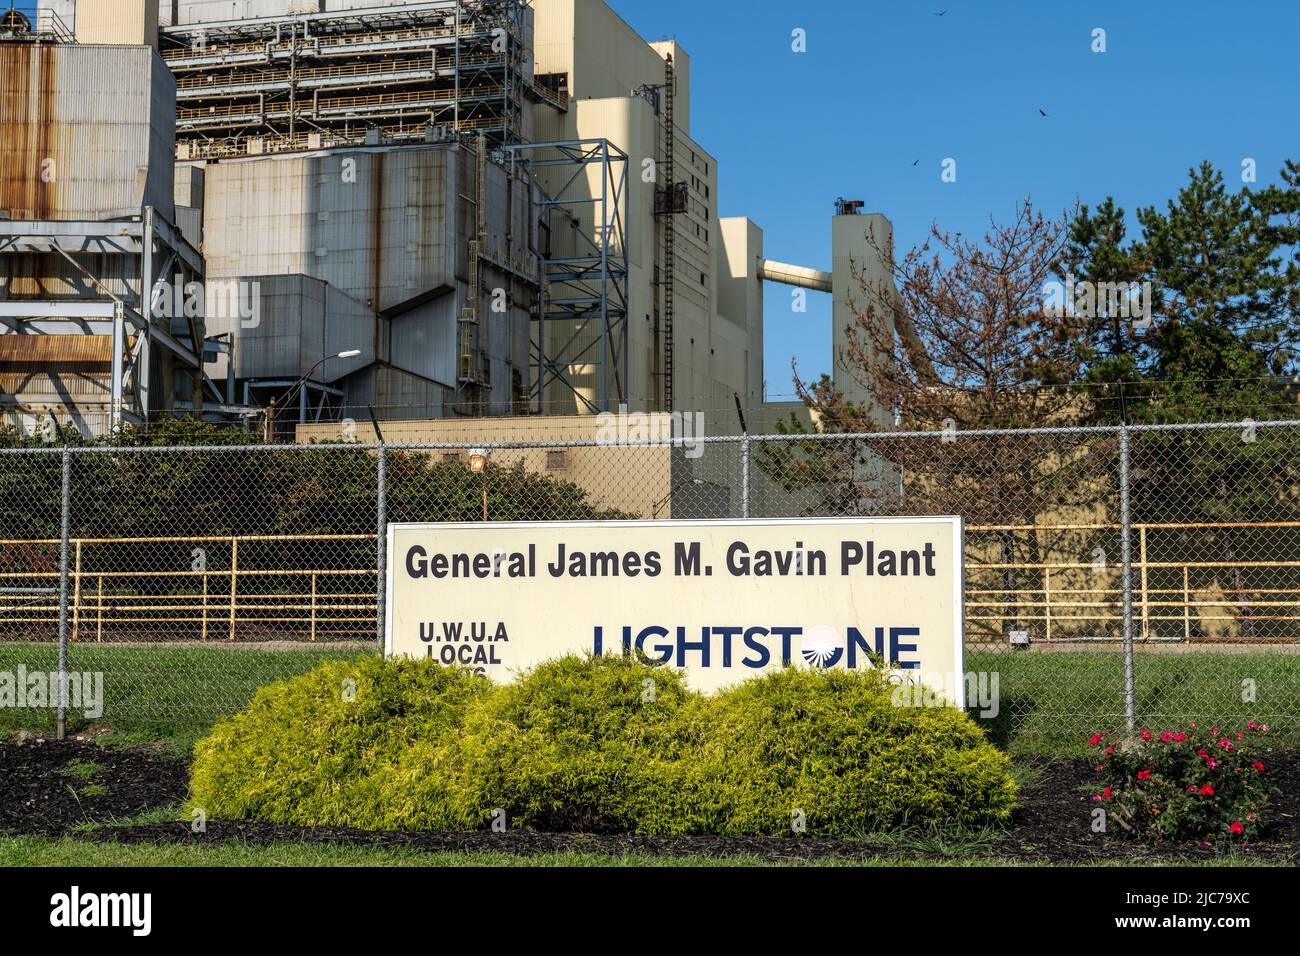 Cheshire, Ohio - Sept. 10, 2021: The General James M. Gavin Power Plant is a 2,600-megawatt supercritical coal-fired power station, owned by Lightston Stock Photo